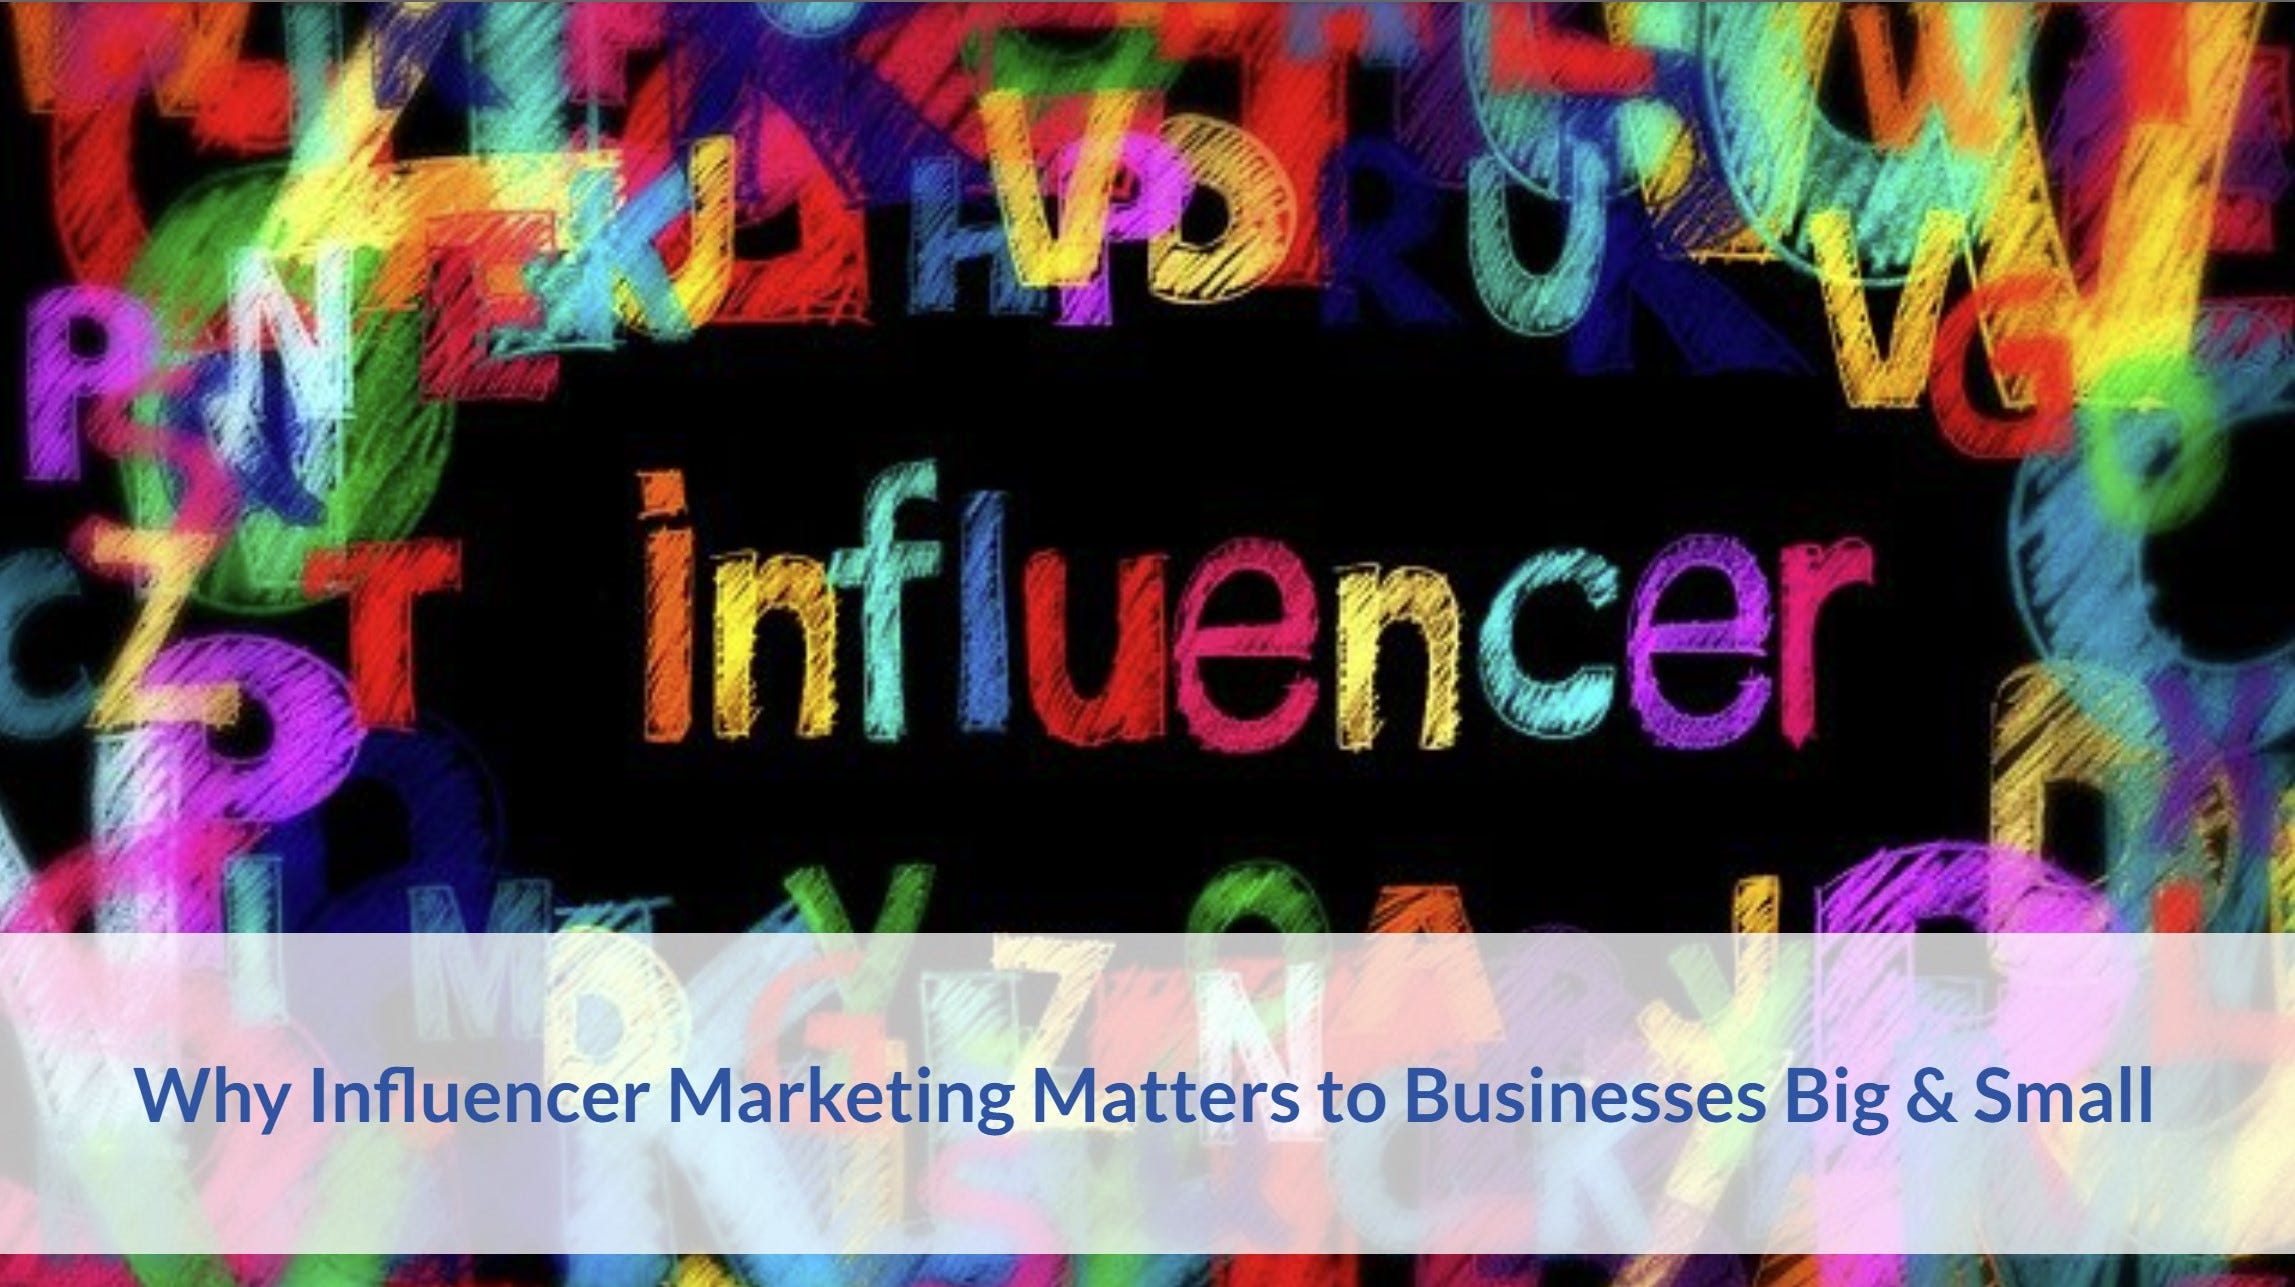 <div>Why Influencer Marketing Matters to Businesses Big & Small</div>